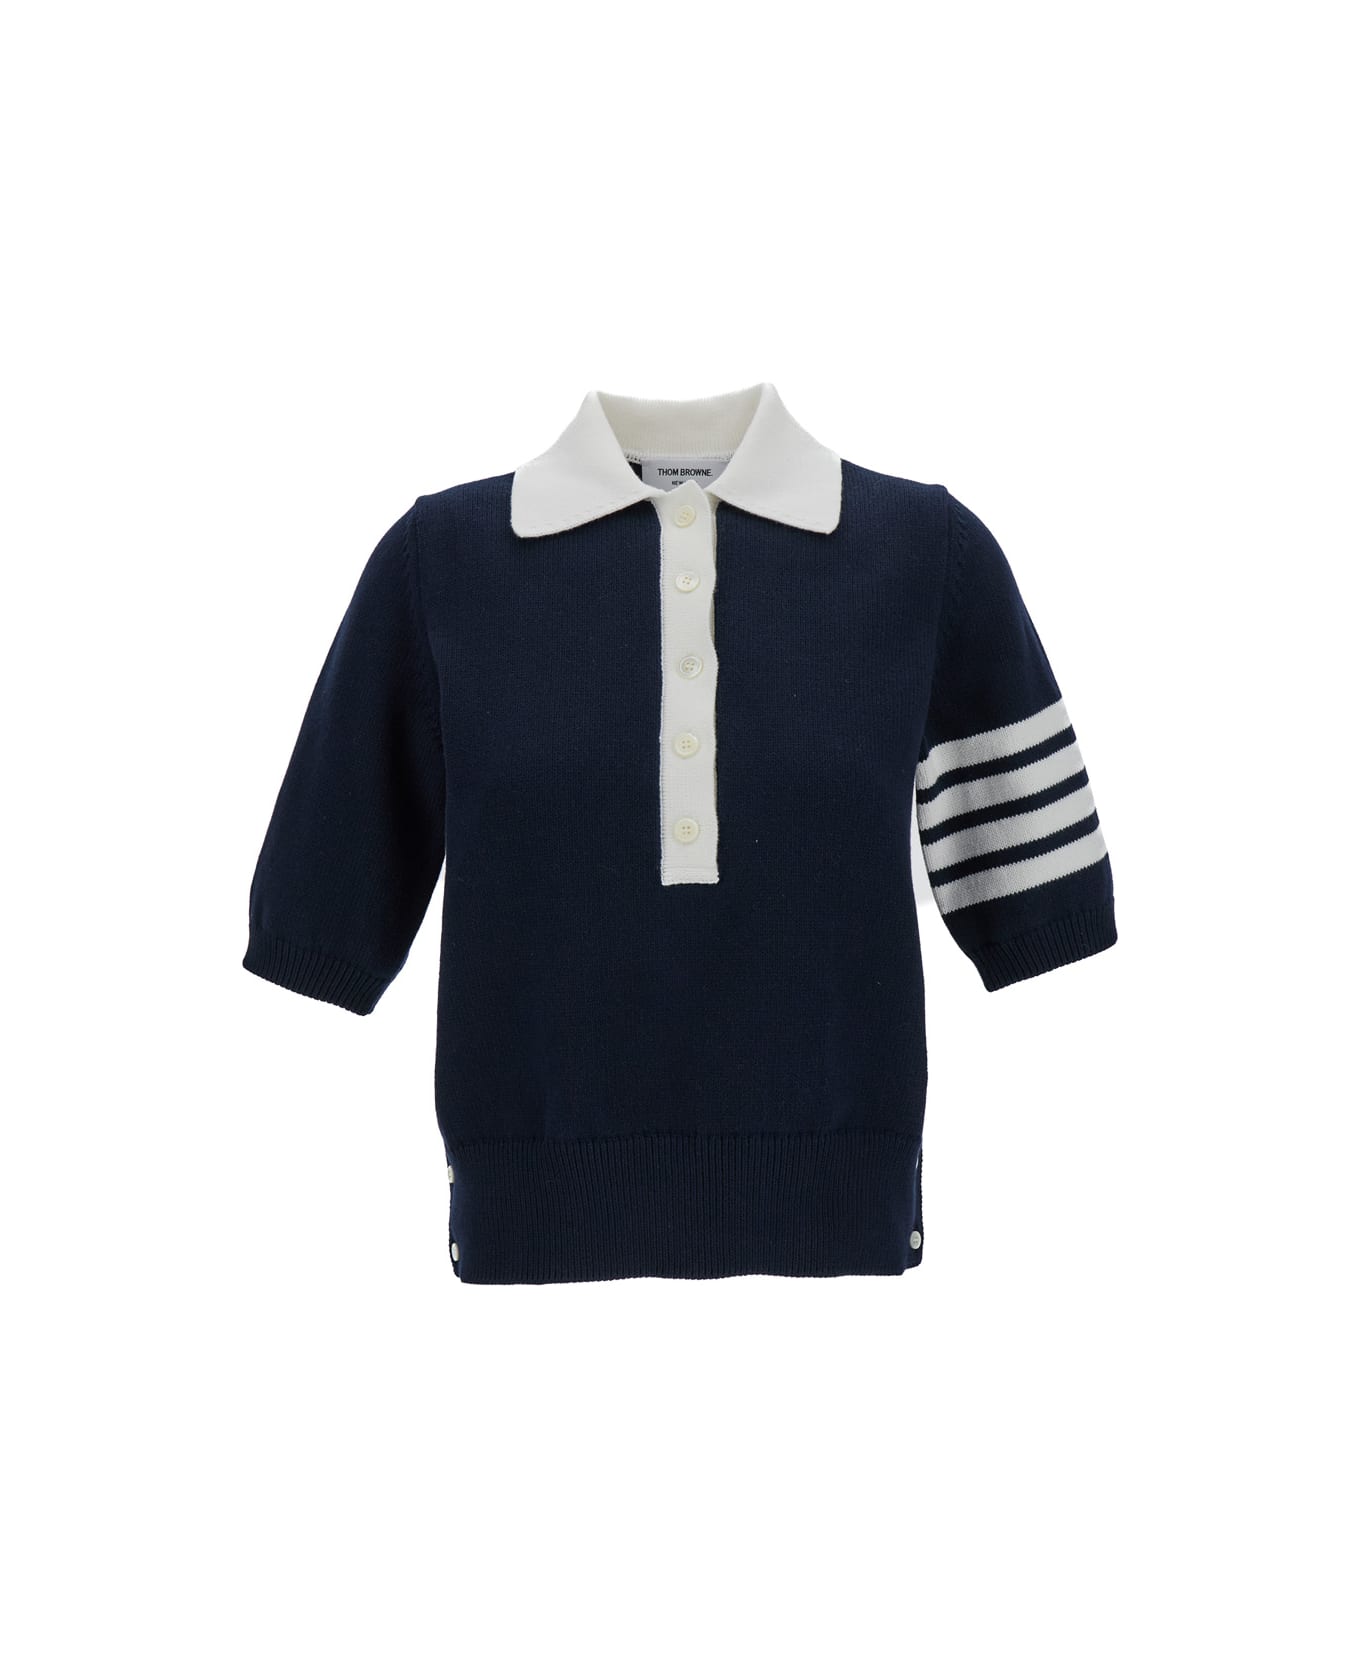 Thom Browne Polo '4bar' - NAVY ポロシャツ